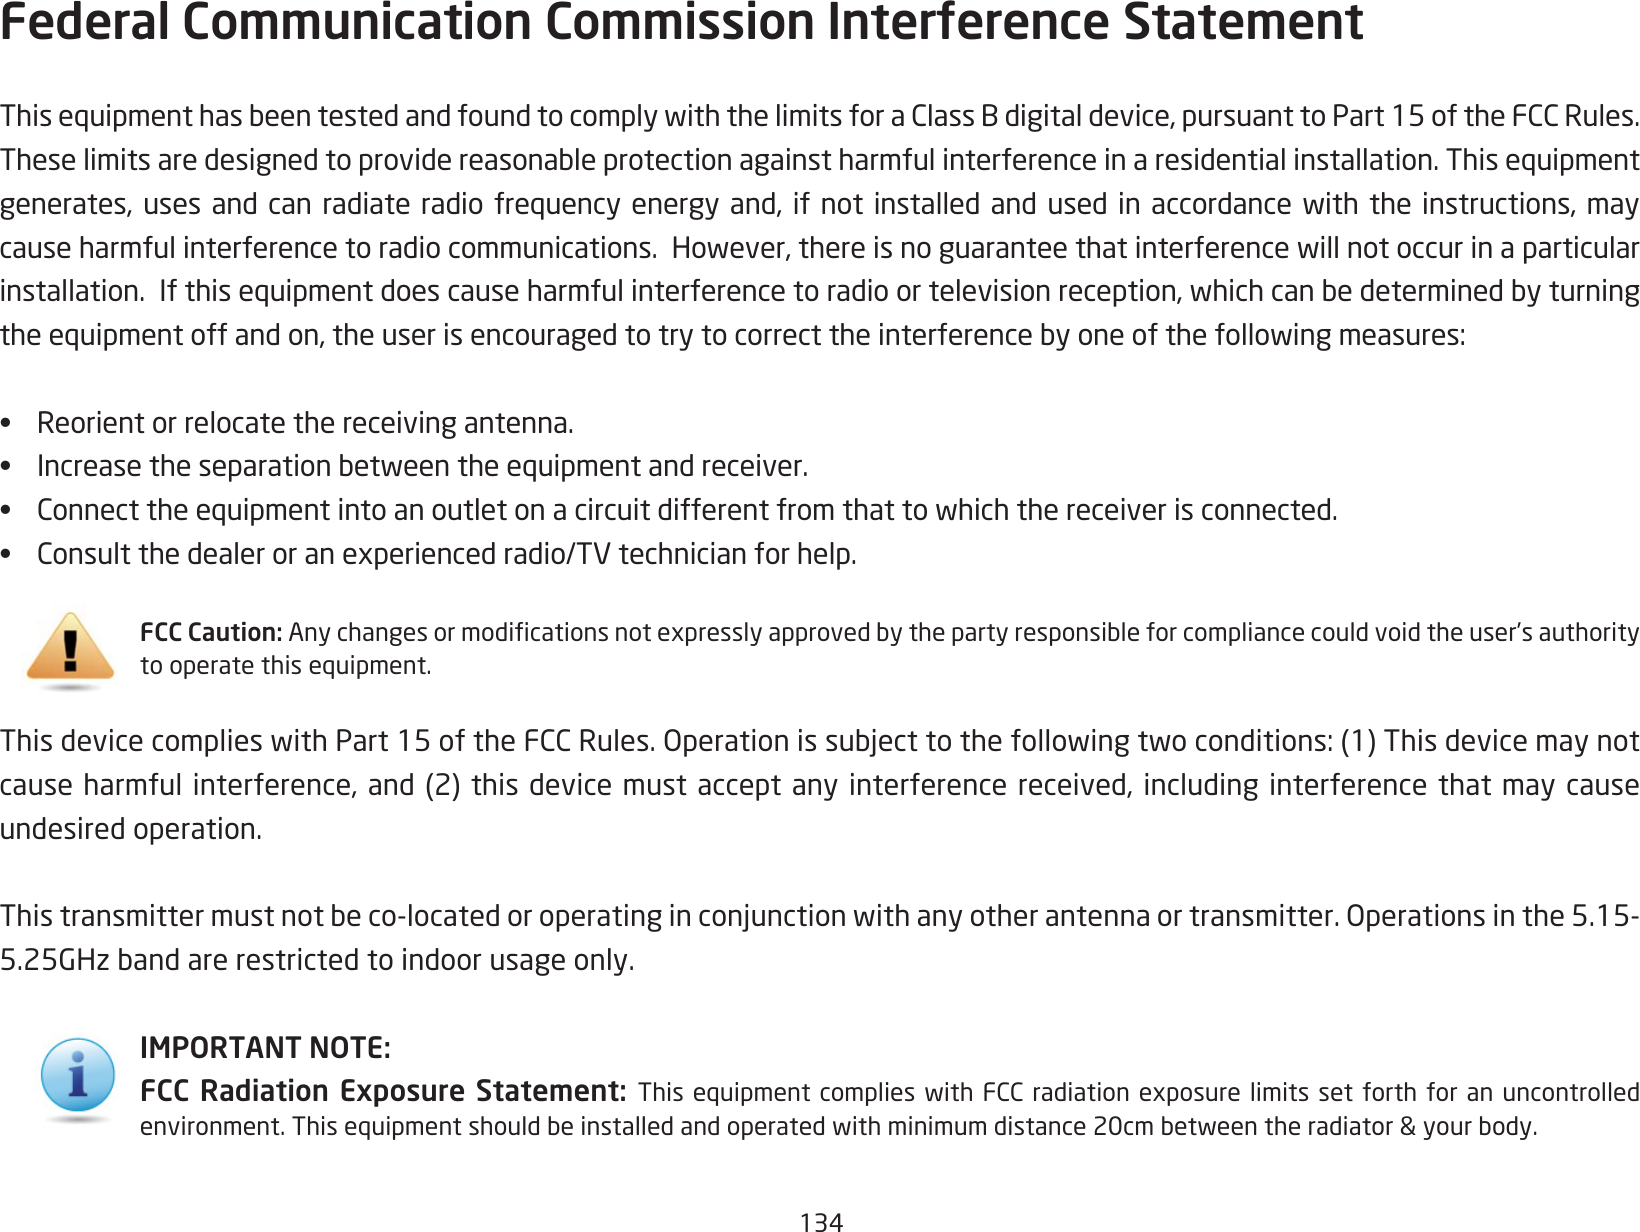 134Federal Communication Commission Interference Statement ThisequipmenthasbeentestedandfoundtocomplywiththelimitsforaClassBdigitaldevice,pursuanttoPart15oftheFCCRules.Theselimitsaredesignedtoprovidereasonableprotectionagainstharmfulinterferenceinaresidentialinstallation.Thisequipmentgenerates,uses andcan radiateradio frequencyenergy and,if notinstalled andused inaccordance withthe instructions,maycauseharmfulinterferencetoradiocommunications.However,thereisnoguaranteethatinterferencewillnotoccurinaparticularinstallation.Ifthisequipmentdoescauseharmfulinterferencetoradioortelevisionreception,whichcanbedeterminedbyturningtheequipmentoffandon,theuserisencouragedtotrytocorrecttheinterferencebyoneofthefollowingmeasures:•  Reorient or relocate the receiving antenna.•  Increasetheseparationbetweentheequipmentandreceiver.•  Connecttheequipmentintoanoutletonacircuitdifferentfromthattowhichthereceiverisconnected.•  Consultthedealeroranexperiencedradio/TVtechnicianforhelp.FCC Caution: Anychangesormodicationsnotexpresslyapprovedbythepartyresponsibleforcompliancecouldvoidtheuser’sauthoritytooperatethisequipment.ThisdevicecomplieswithPart15oftheFCCRules.Operationissubjecttothefollowingtwoconditions:(1)Thisdevicemaynotcauseharmfulinterference,and(2)thisdevicemustacceptanyinterferencereceived,includinginterferencethatmaycauseundesired operation.Thistransmittermustnotbeco-locatedoroperatinginconjunctionwithanyotherantennaortransmitter.Operationsinthe5.15-5.25GHzbandarerestrictedtoindoorusageonly.IMPORTANT NOTE:FCC Radiation Exposure Statement: ThisequipmentcomplieswithFCCradiationexposurelimitssetforthforanuncontrolledenvironment.Thisequipmentshouldbeinstalledandoperatedwithminimumdistance20cmbetweentheradiator&amp;yourbody.